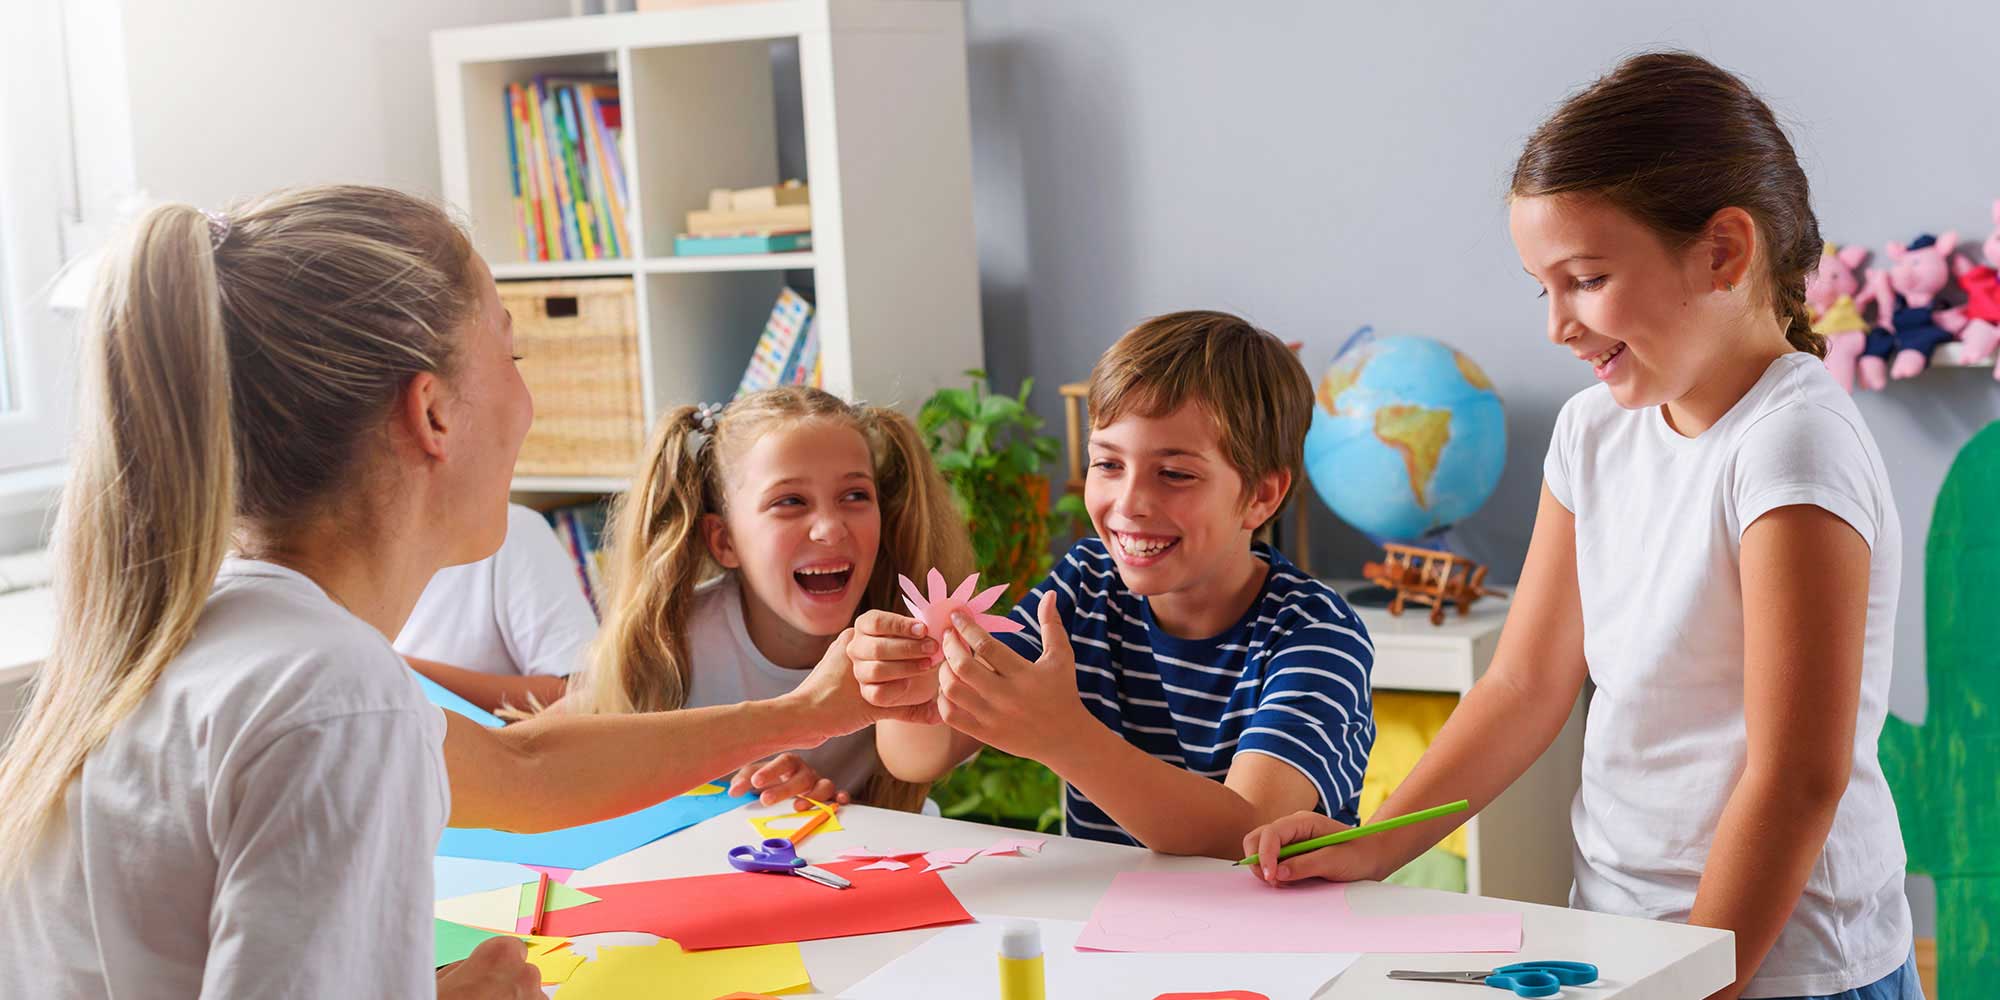 7 Social Emotional Learning Activities for the Classroom (w/ SEL Skills List)